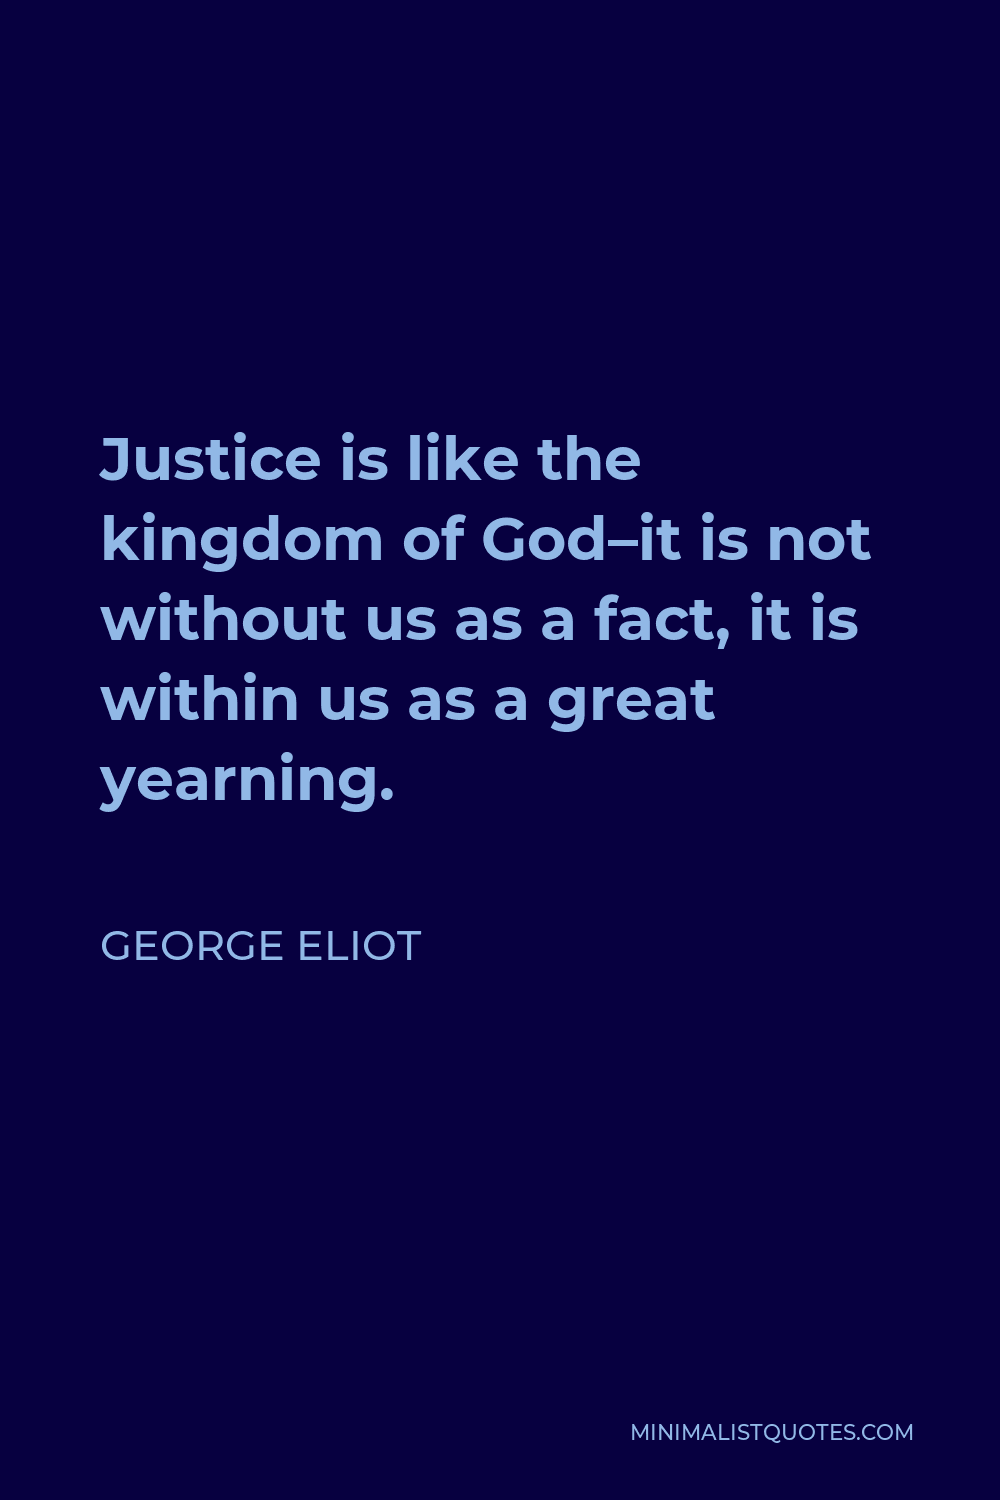 George Eliot Quote - Justice is like the kingdom of God–it is not without us as a fact, it is within us as a great yearning.